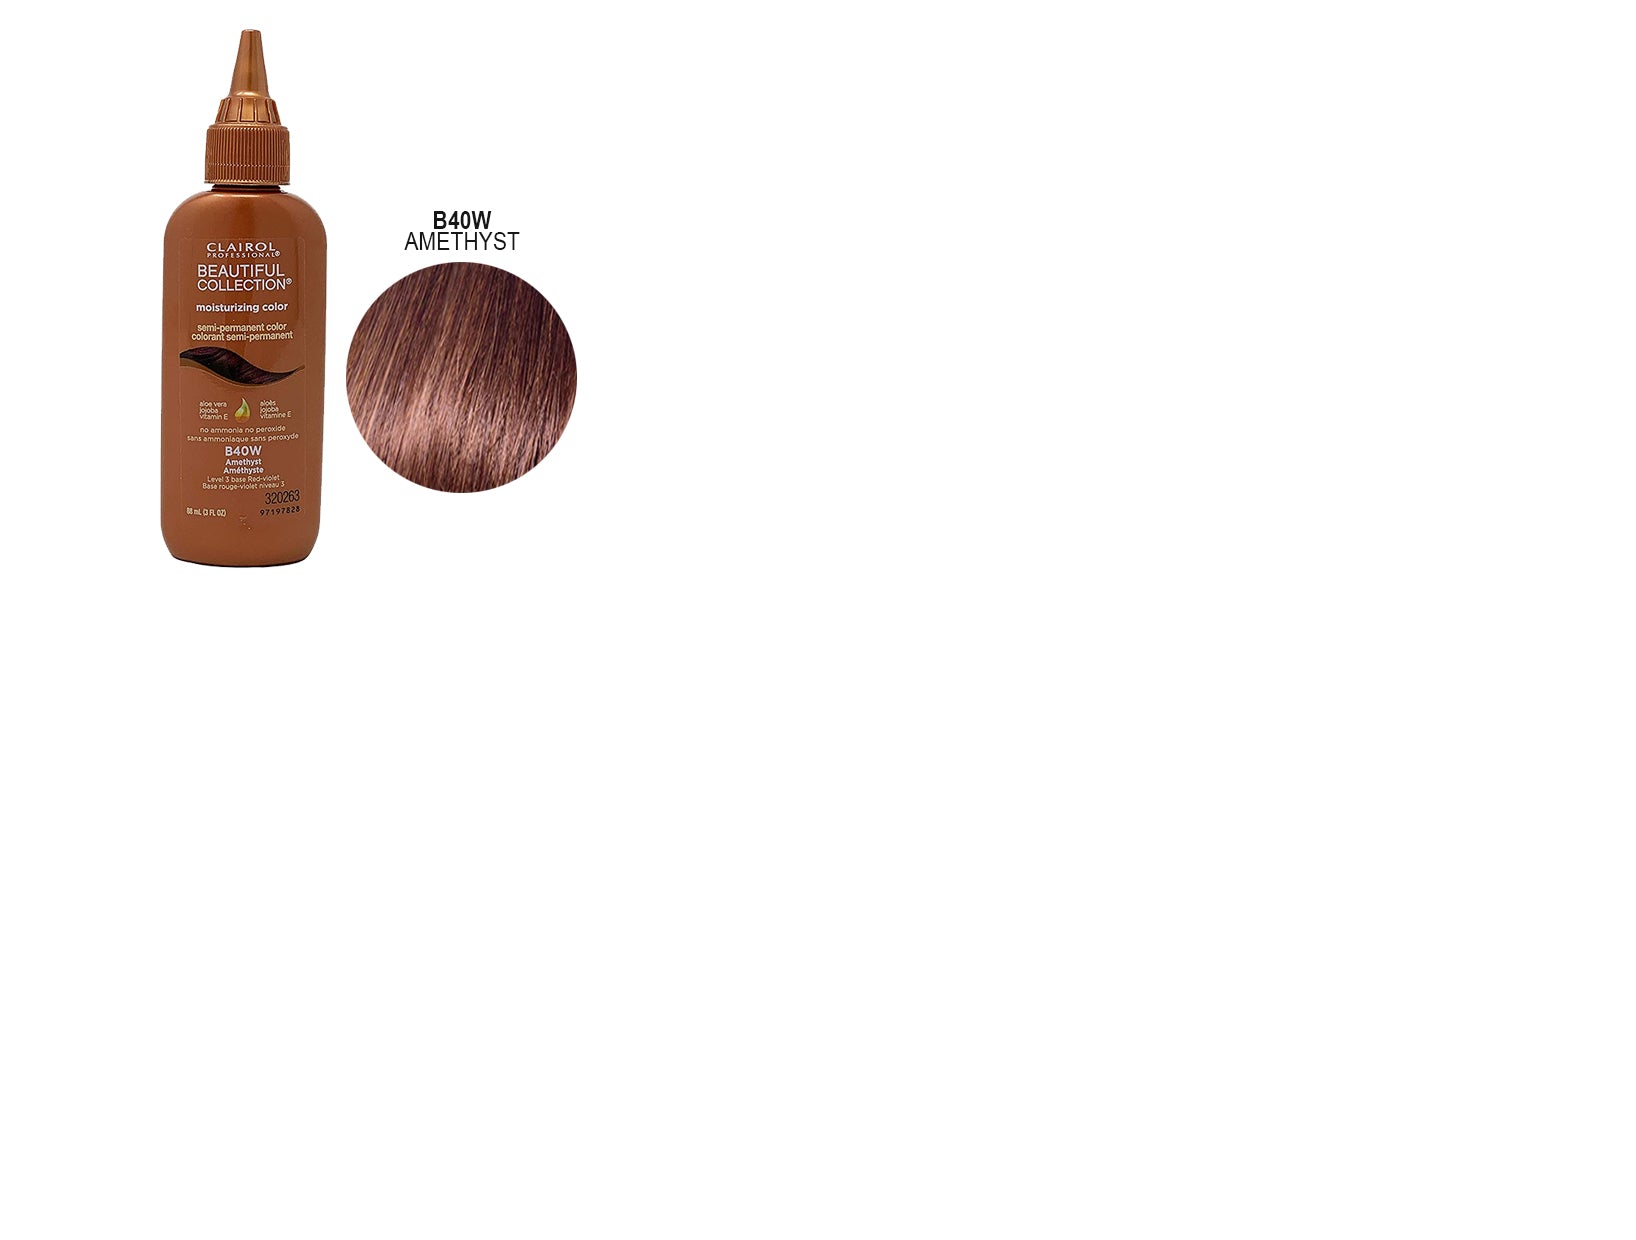 CLAIROL PROFESSIONAL BEAUTIFUL COLLECTION SEMI-PERMANENT HAIR COLOR - 7 COLORS 3oz